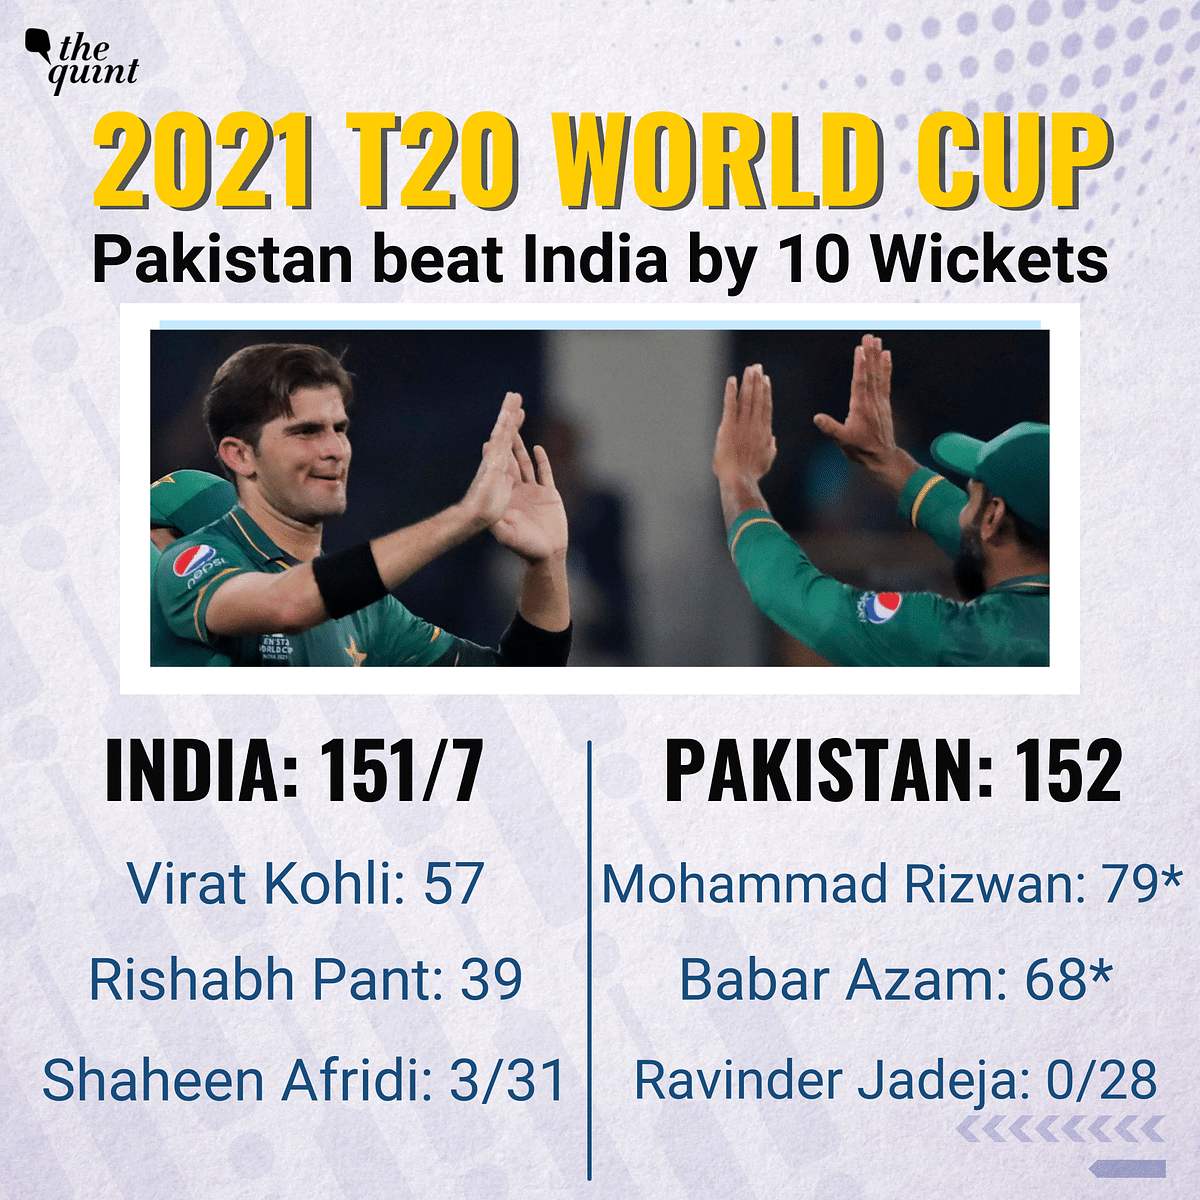 Pakistan thrashed India by 10 wickets in the 2021 T20 World Cup.